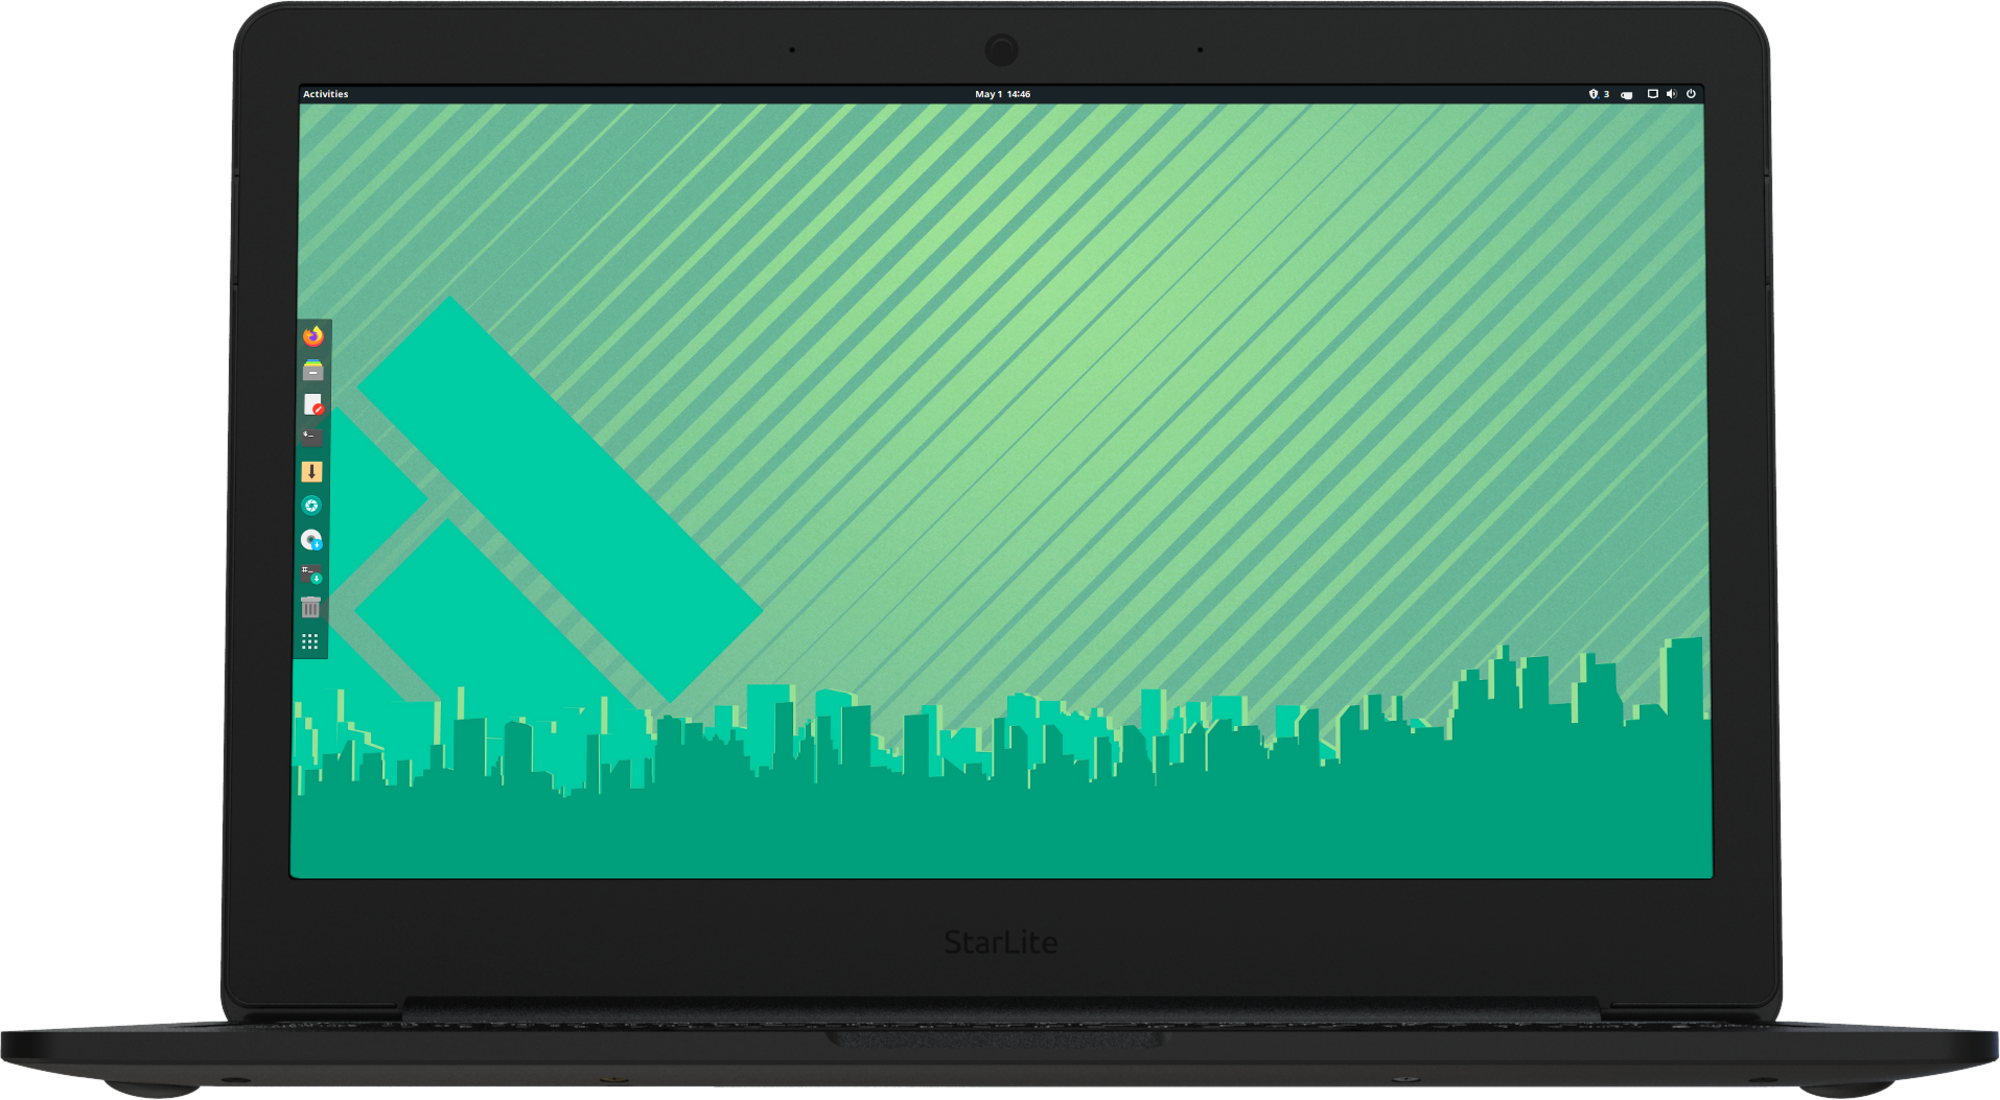 Laptop with pre-installed Manjaro Linux